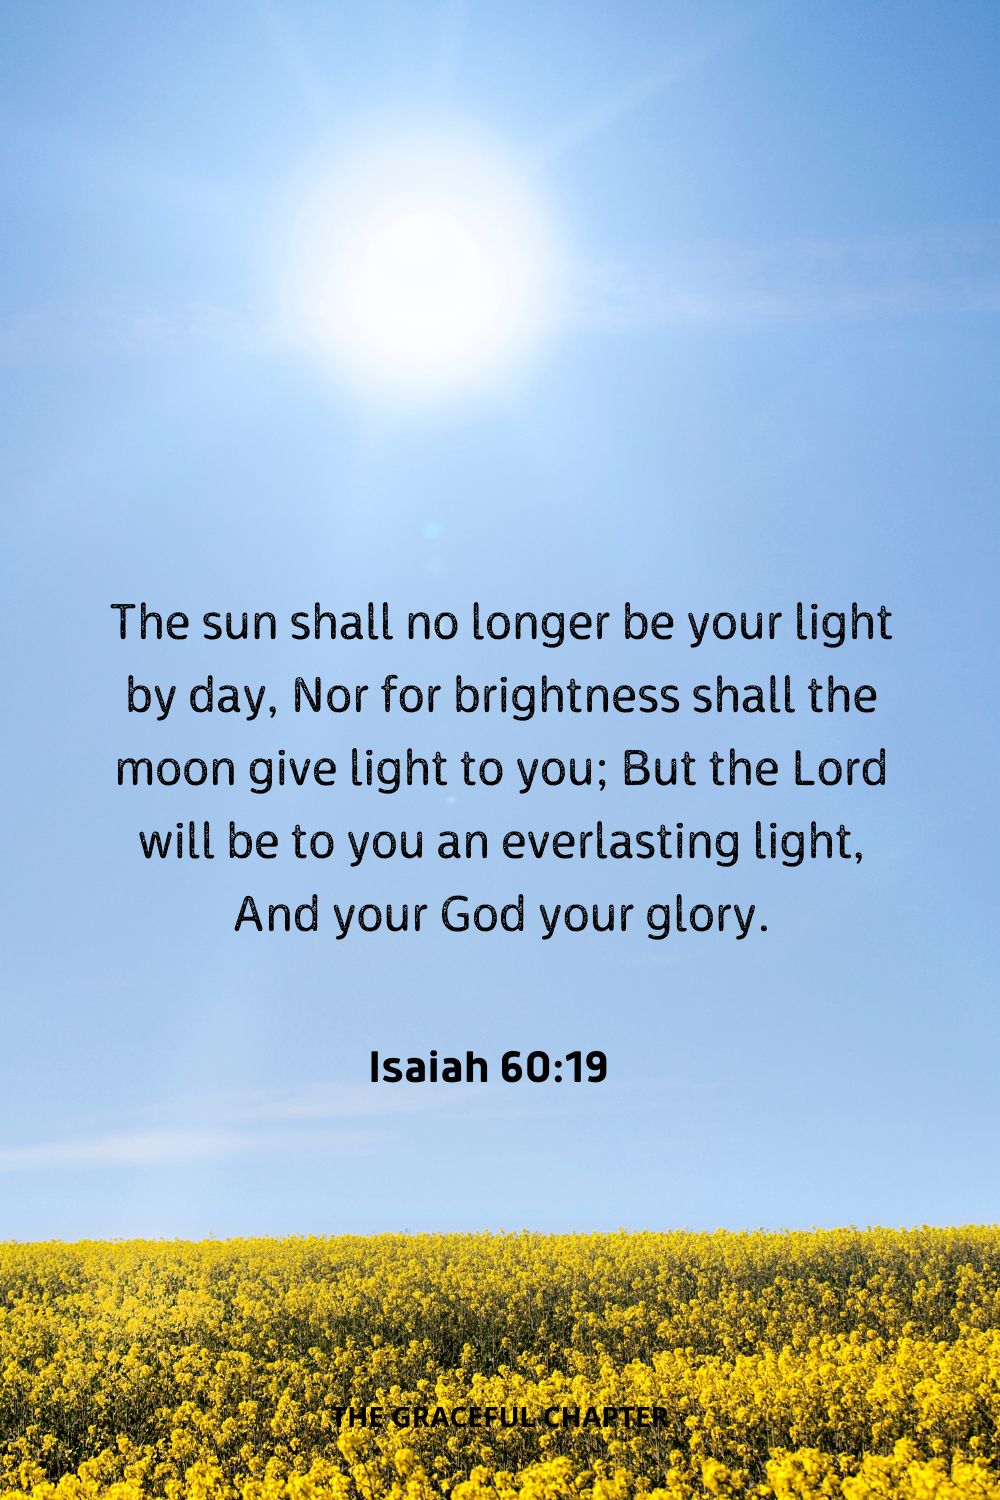 The sun shall no longer be your light by day, Nor for brightness shall the moon give light to you; But the Lord will be to you an everlasting light, And your God your glory.